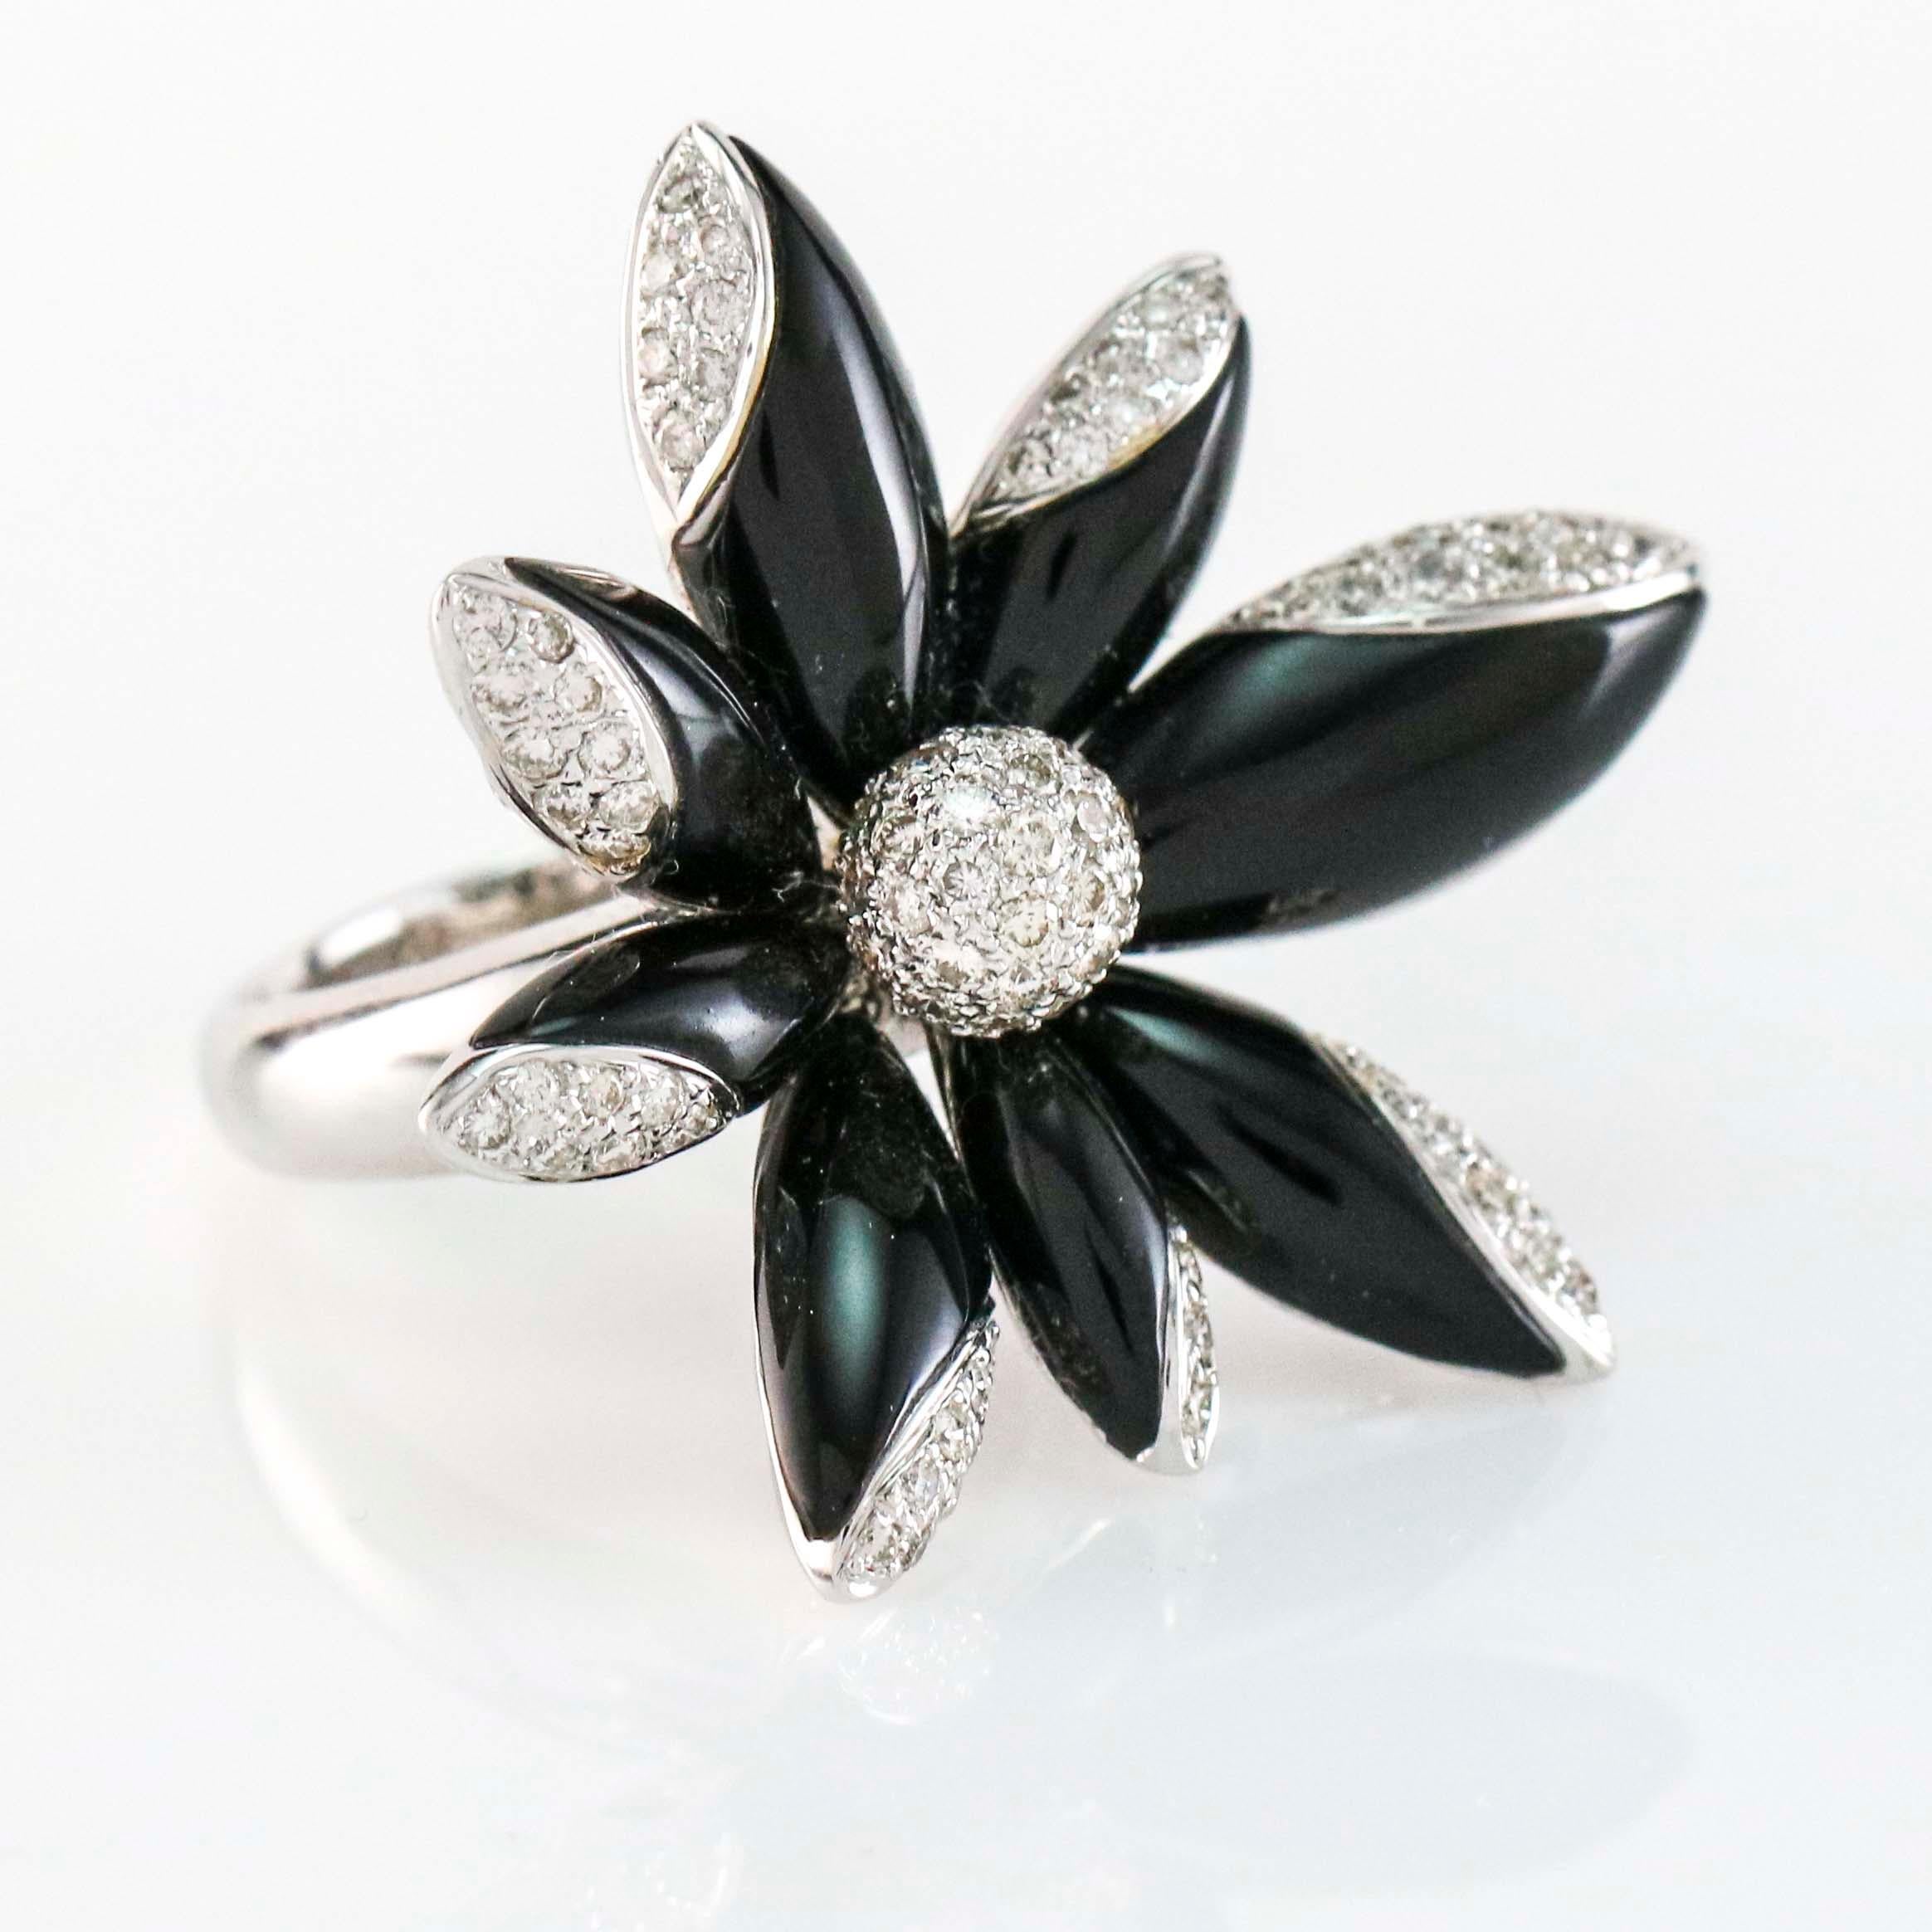 Black onyx flower cocktail ring crafted in 18 karat white gold with 1.23 carats of round brilliant cut diamonds. Size 7. 